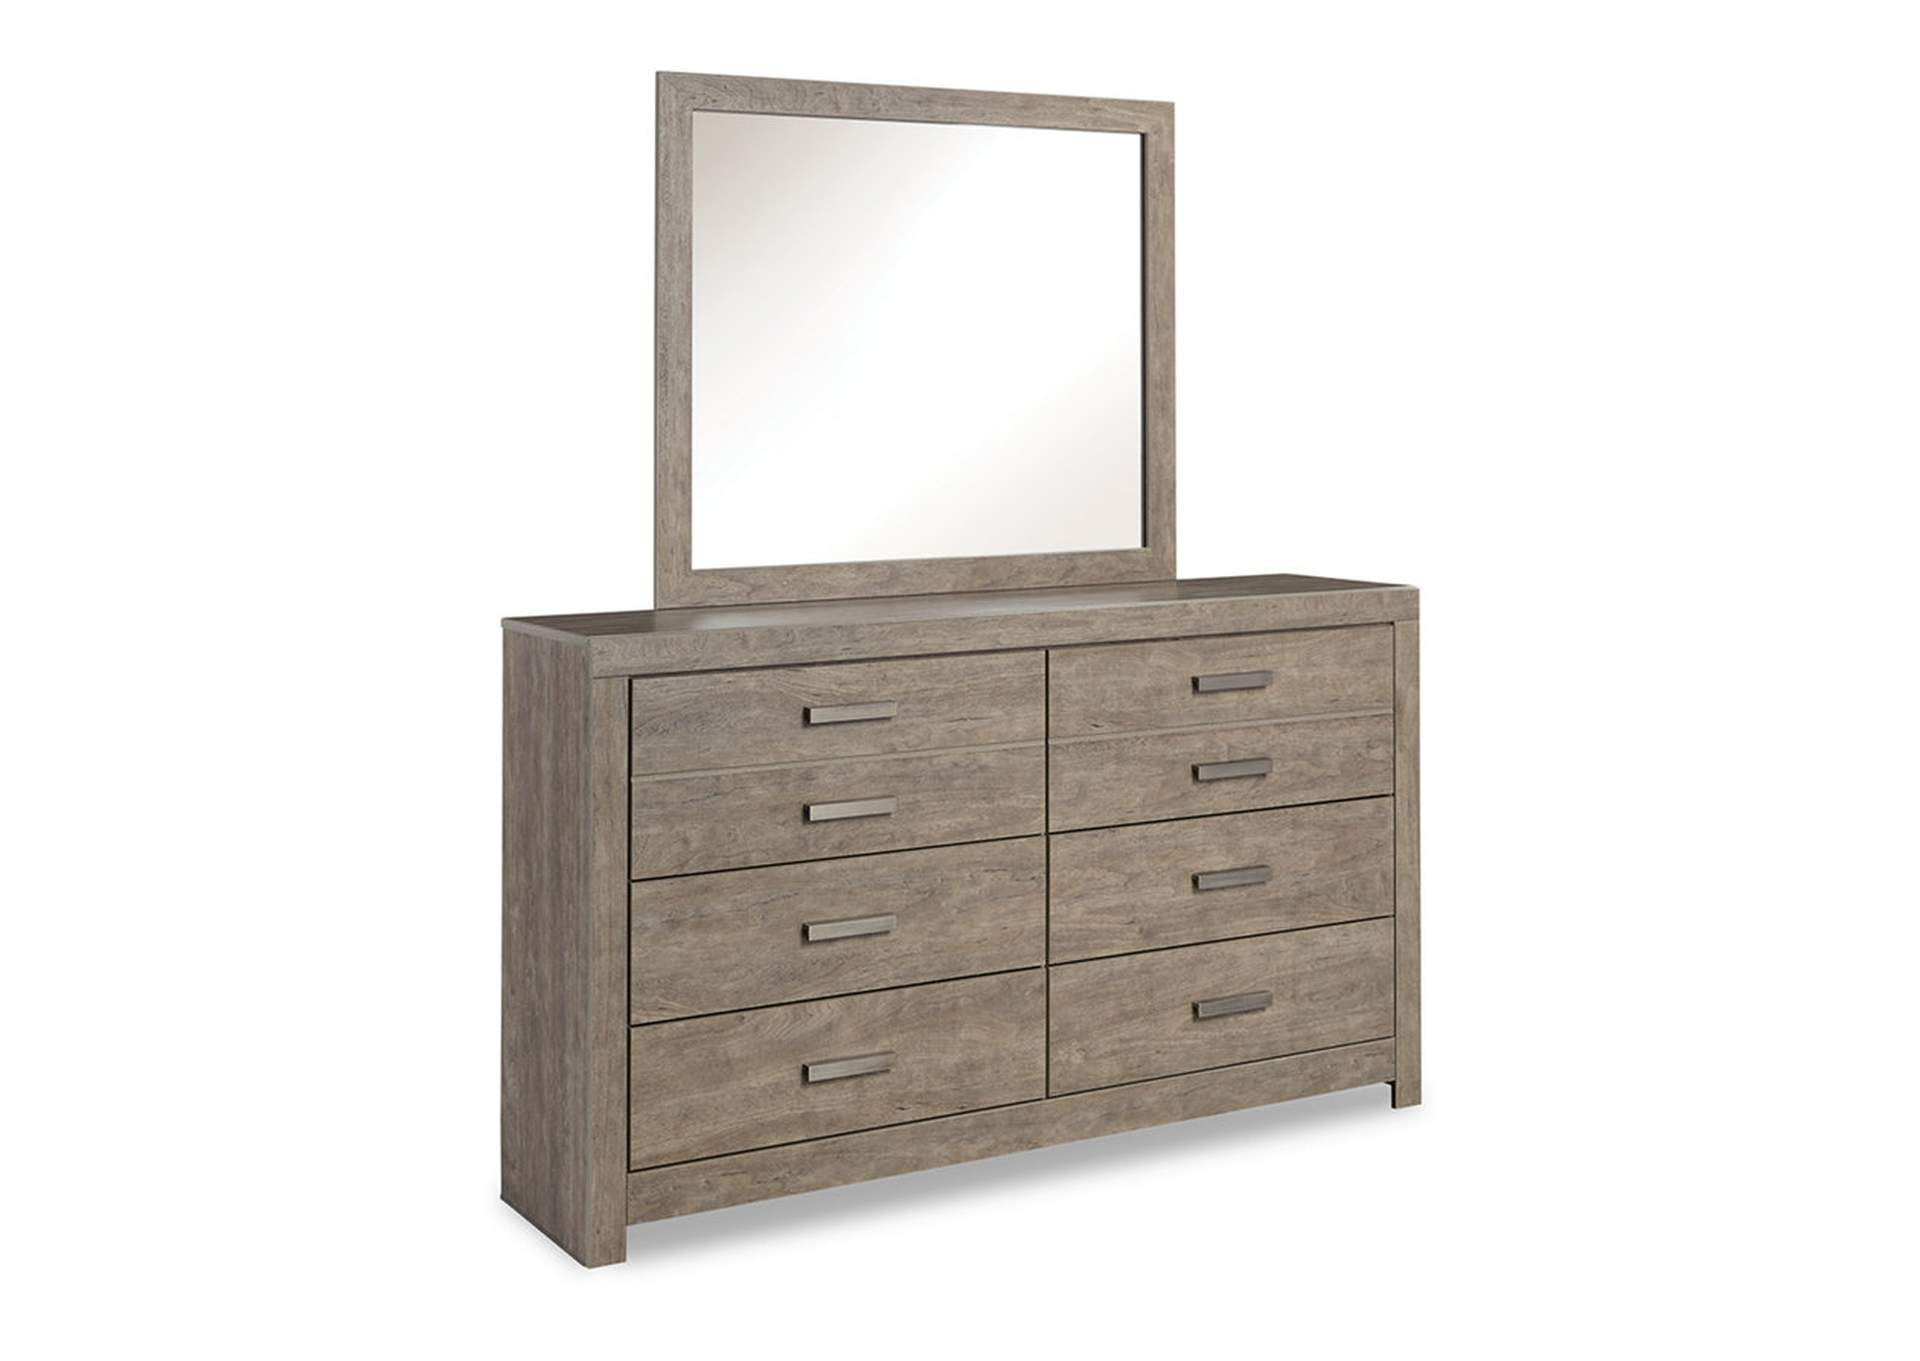 Culverbach King Panel Bed, Dresser, Mirror, Chest and Nightstand,Signature Design By Ashley